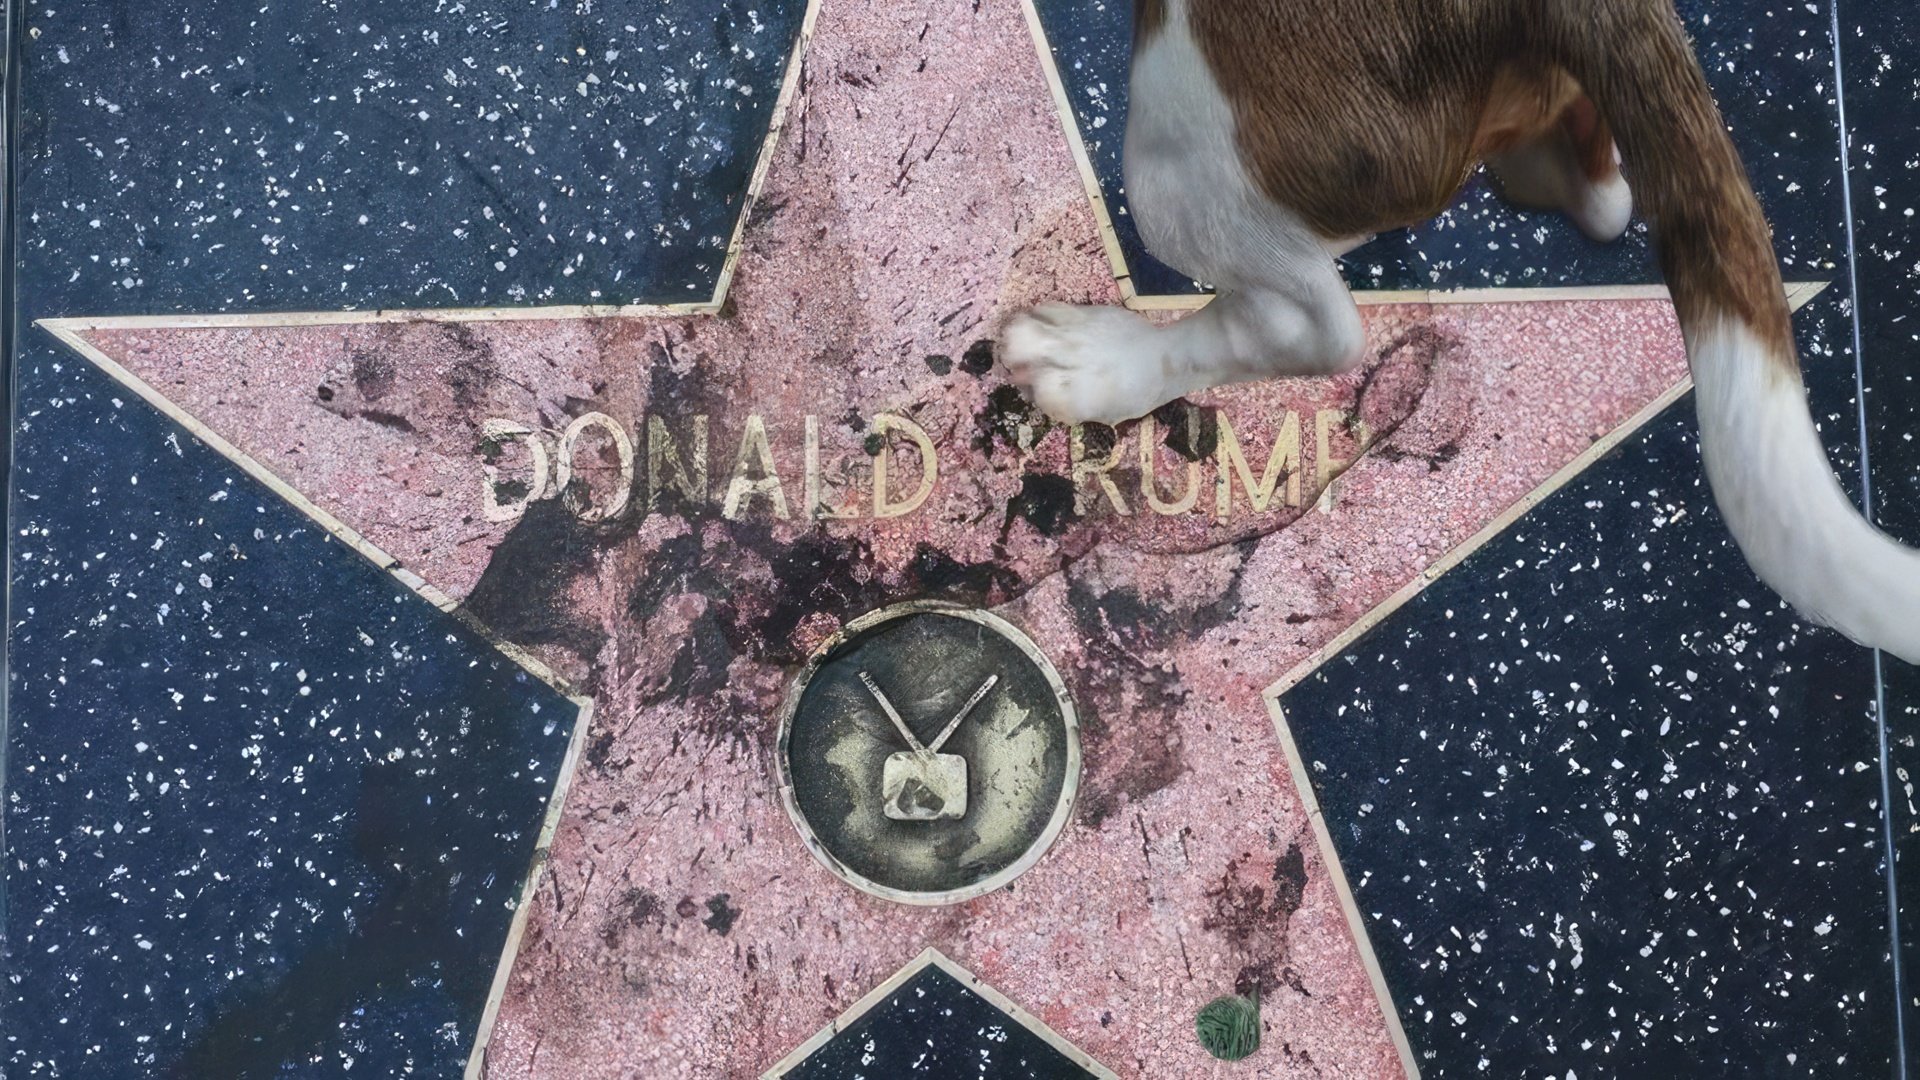 Trump's star has been repeatedly targeted by vandals